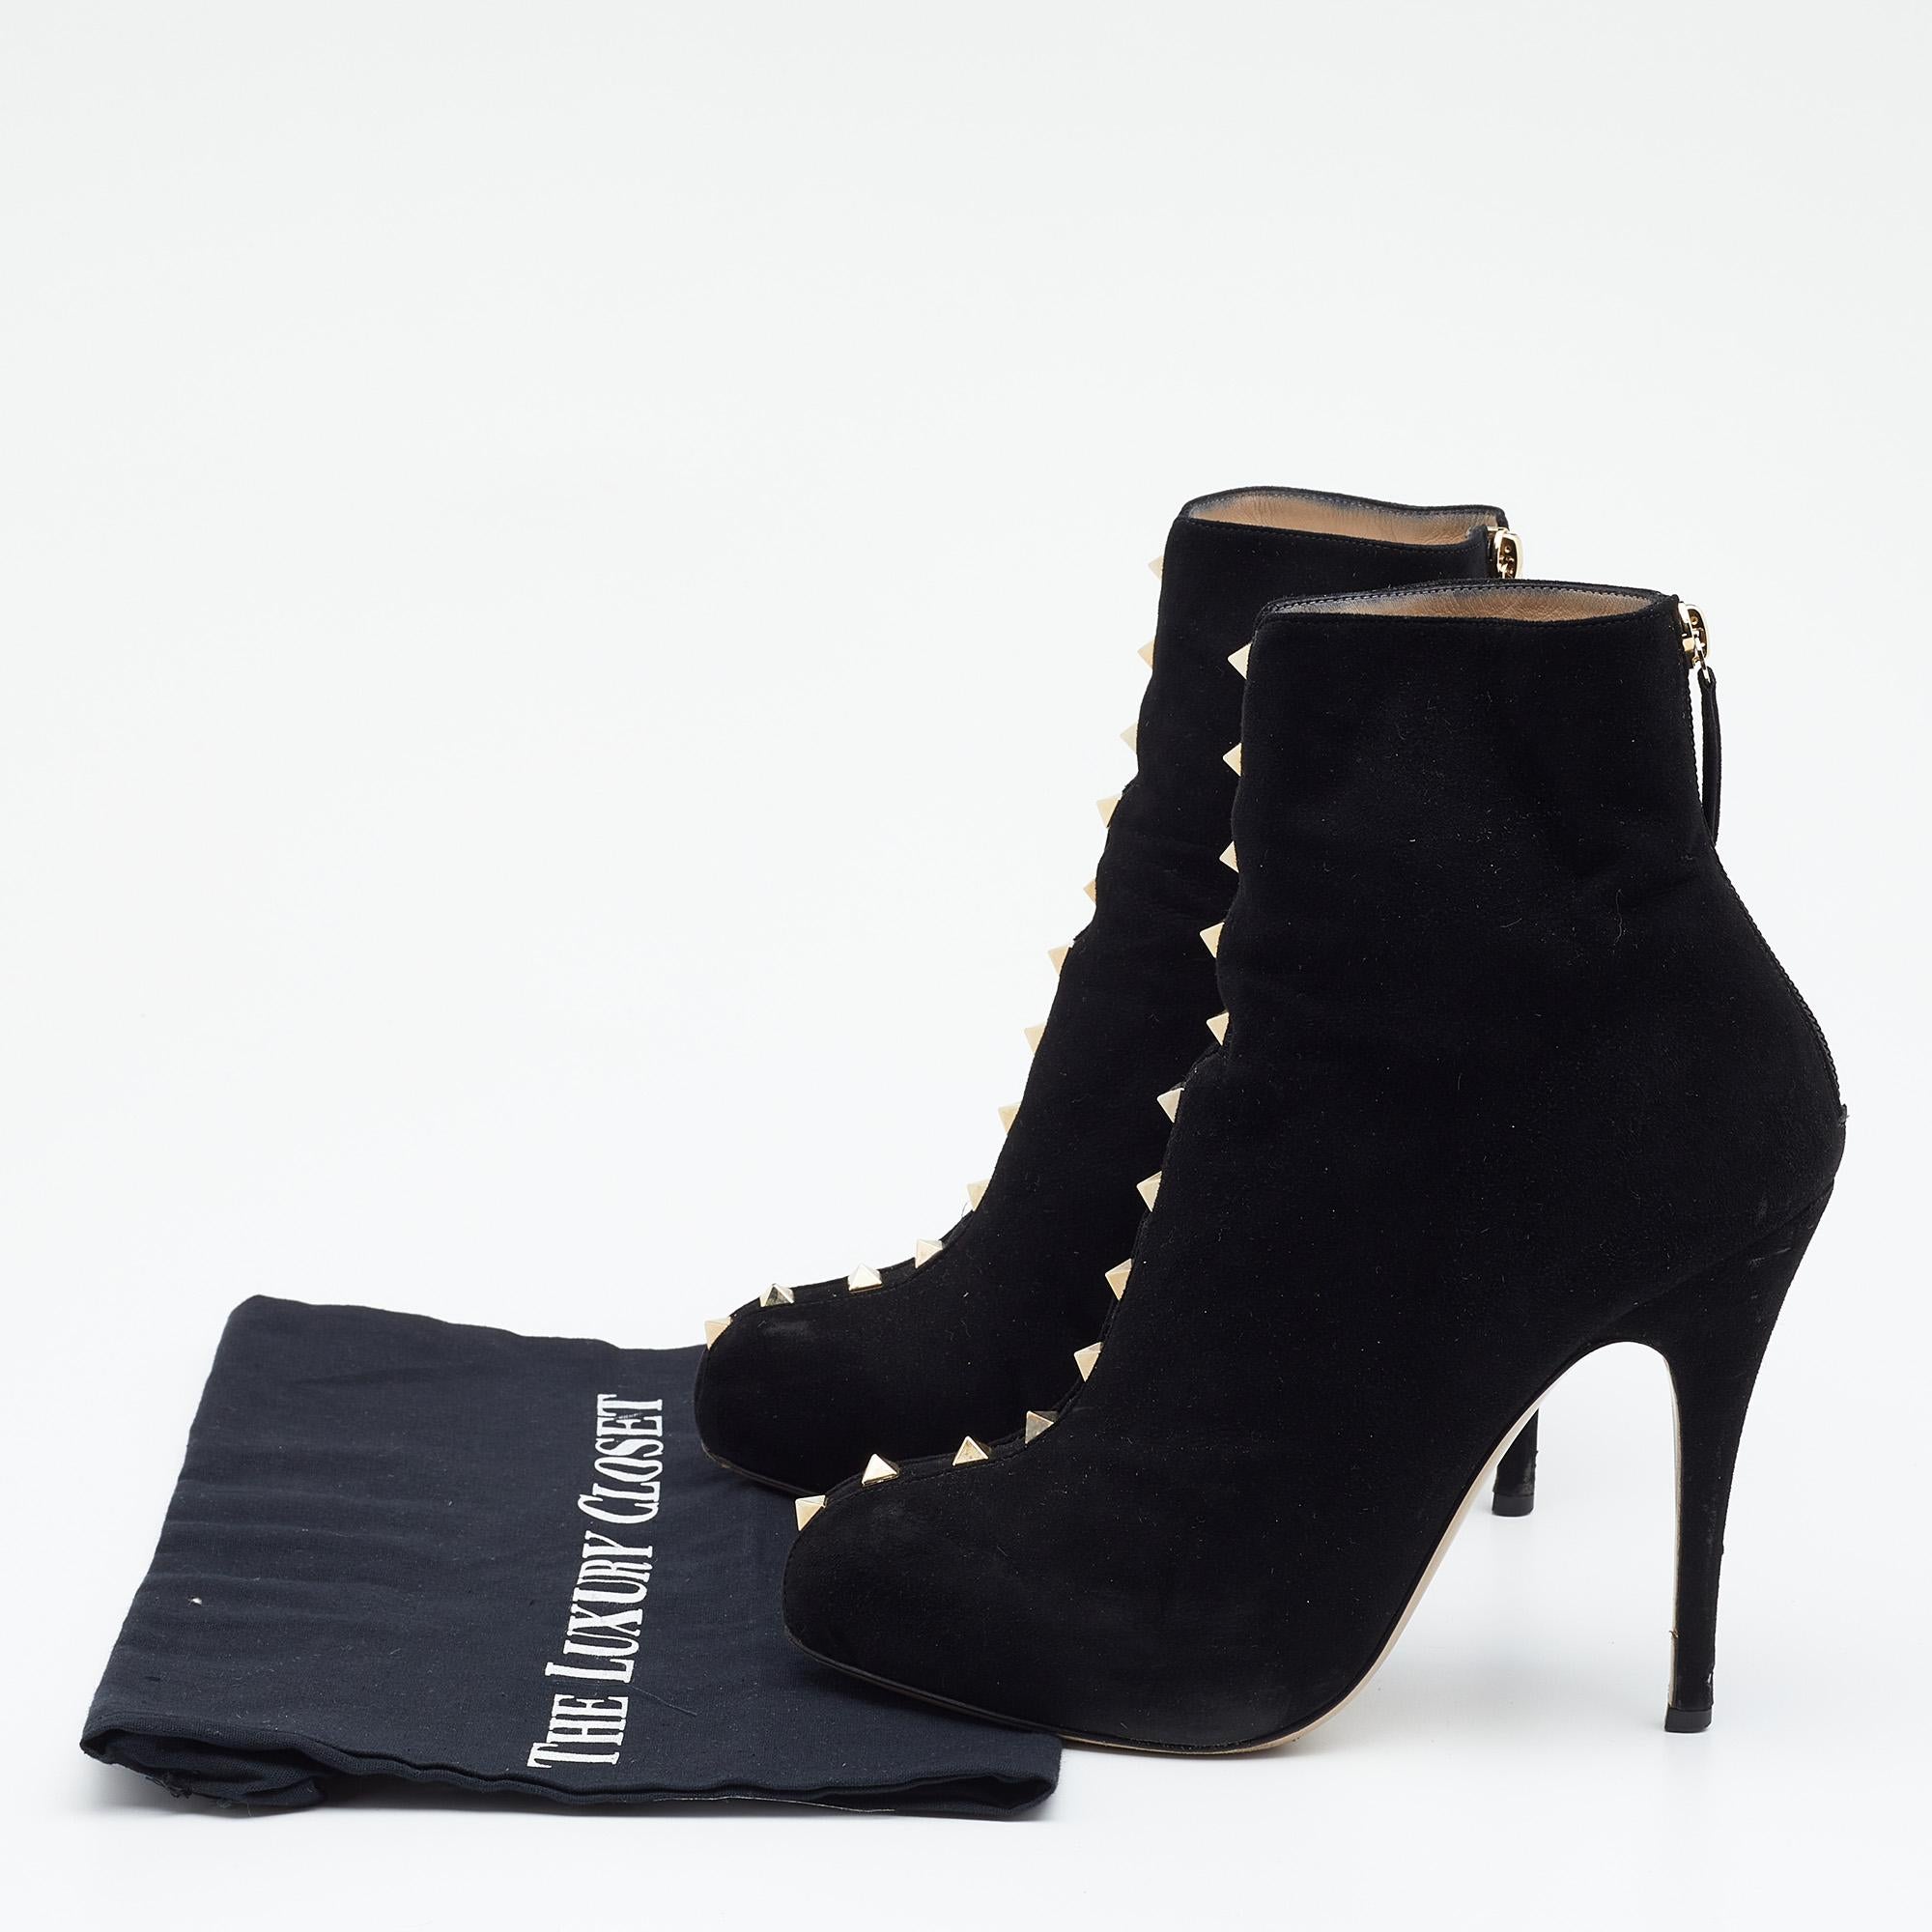 One of the finest pairs of boots you will ever own is this pair by Valentino. Crafted from suede, they come in a stunning shade of black. They are lined with leather and are a wardrobe staple. Featuring the signature Rockstuds and 12 cm heels, they